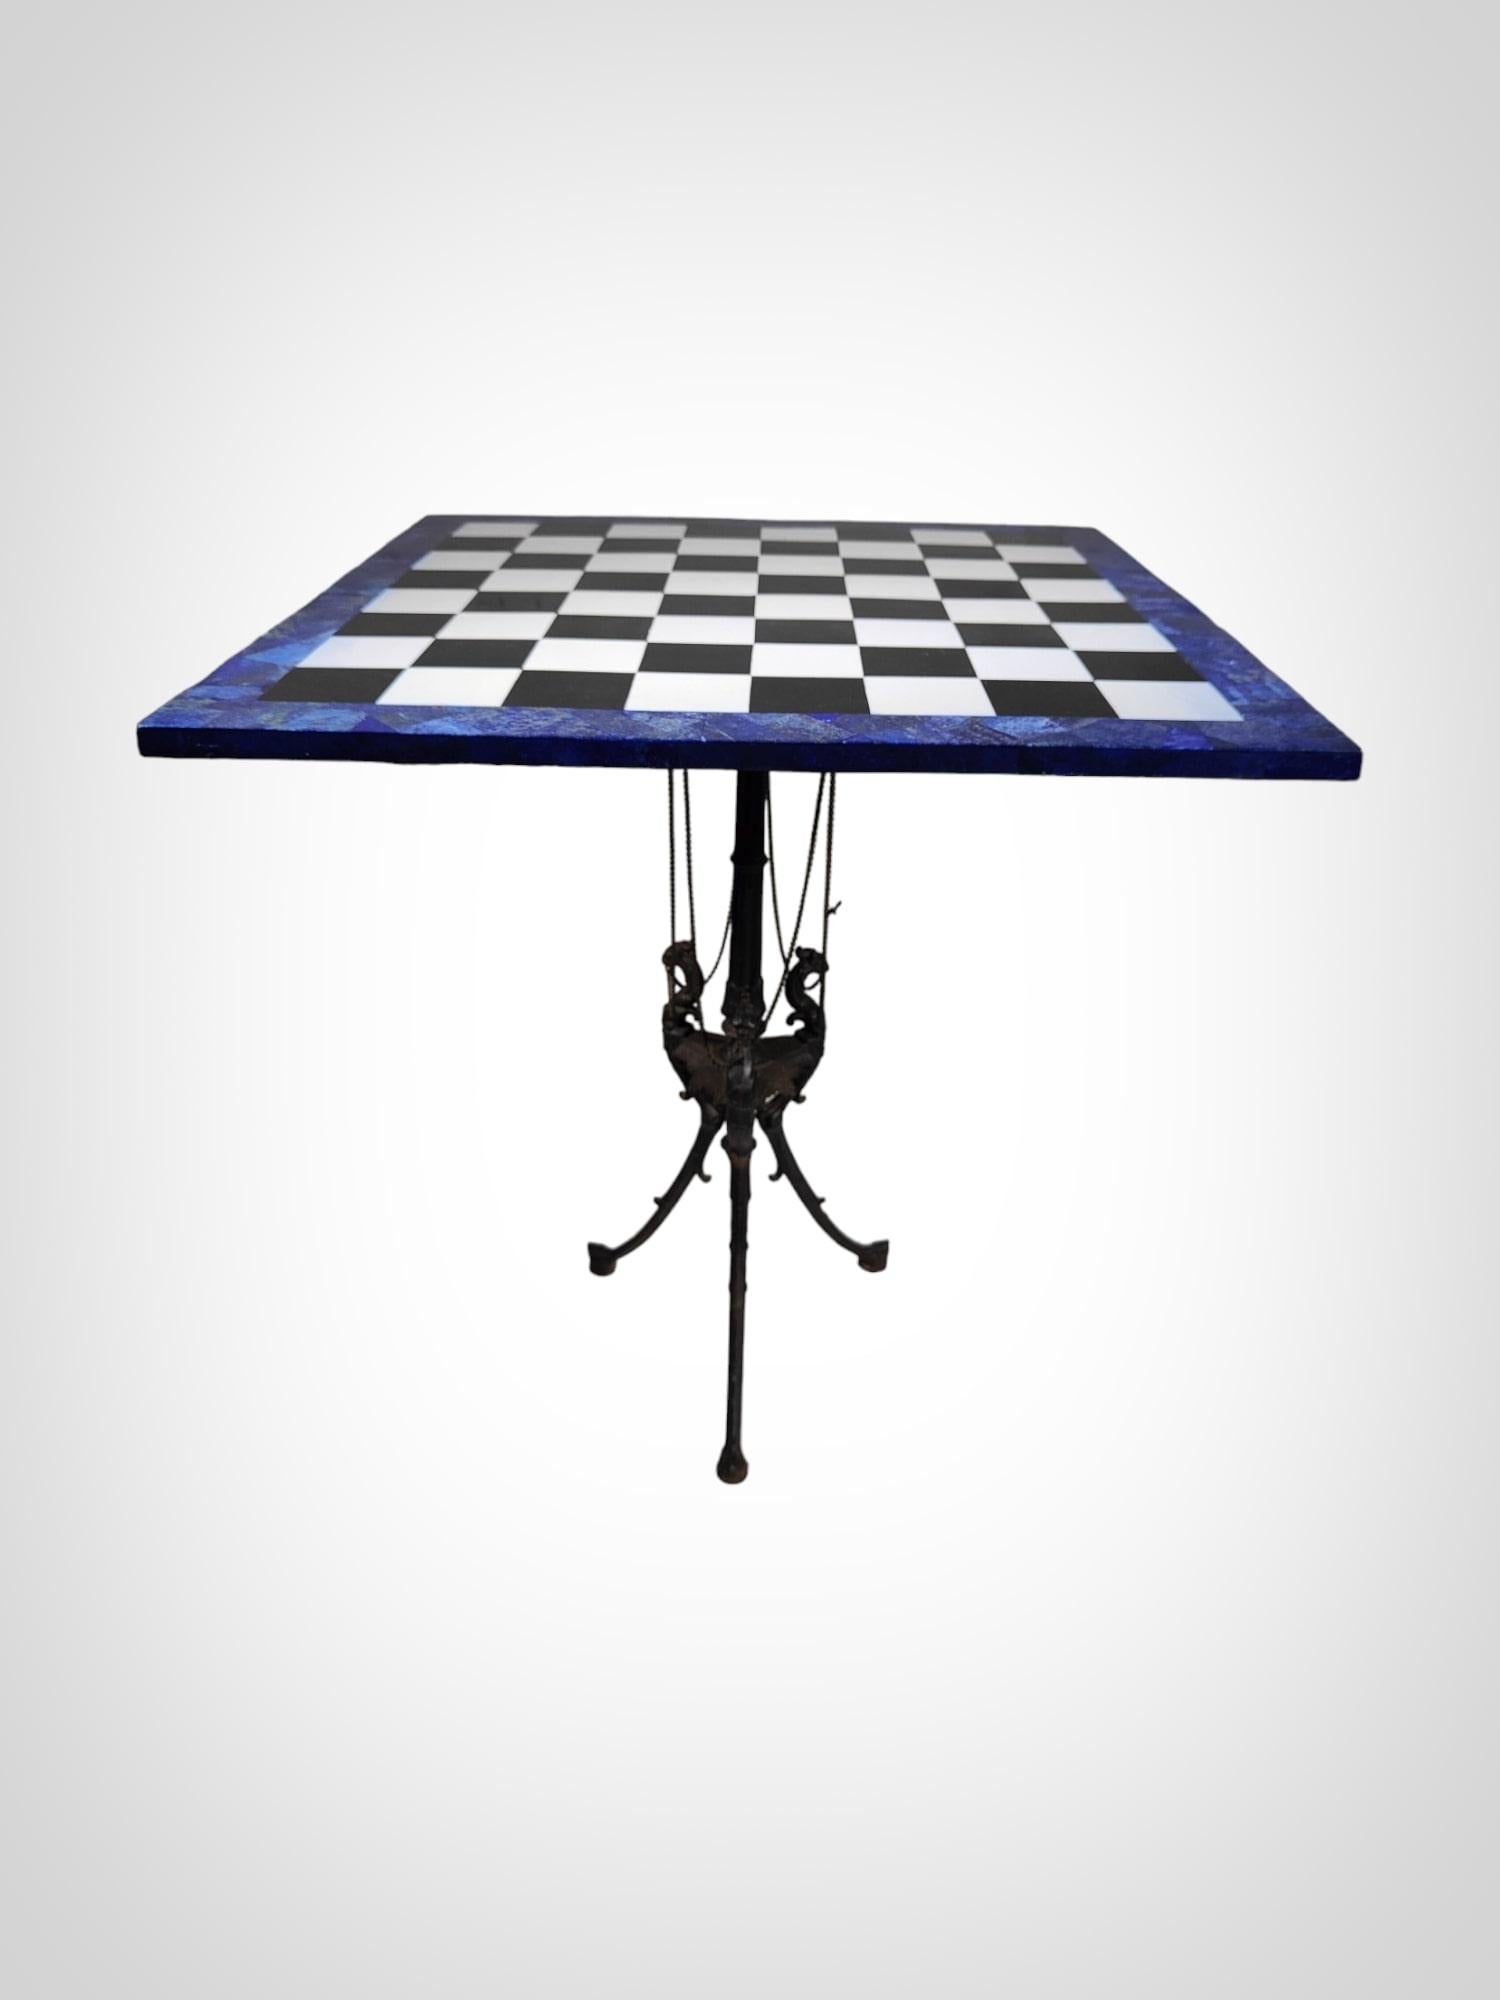 This elegant Italian chess table from the 1950s is an exceptional piece crafted in lapis lazuli and various types of marble. The meticulous craftsmanship and the use of high-quality materials make this table a testament to the elegance and